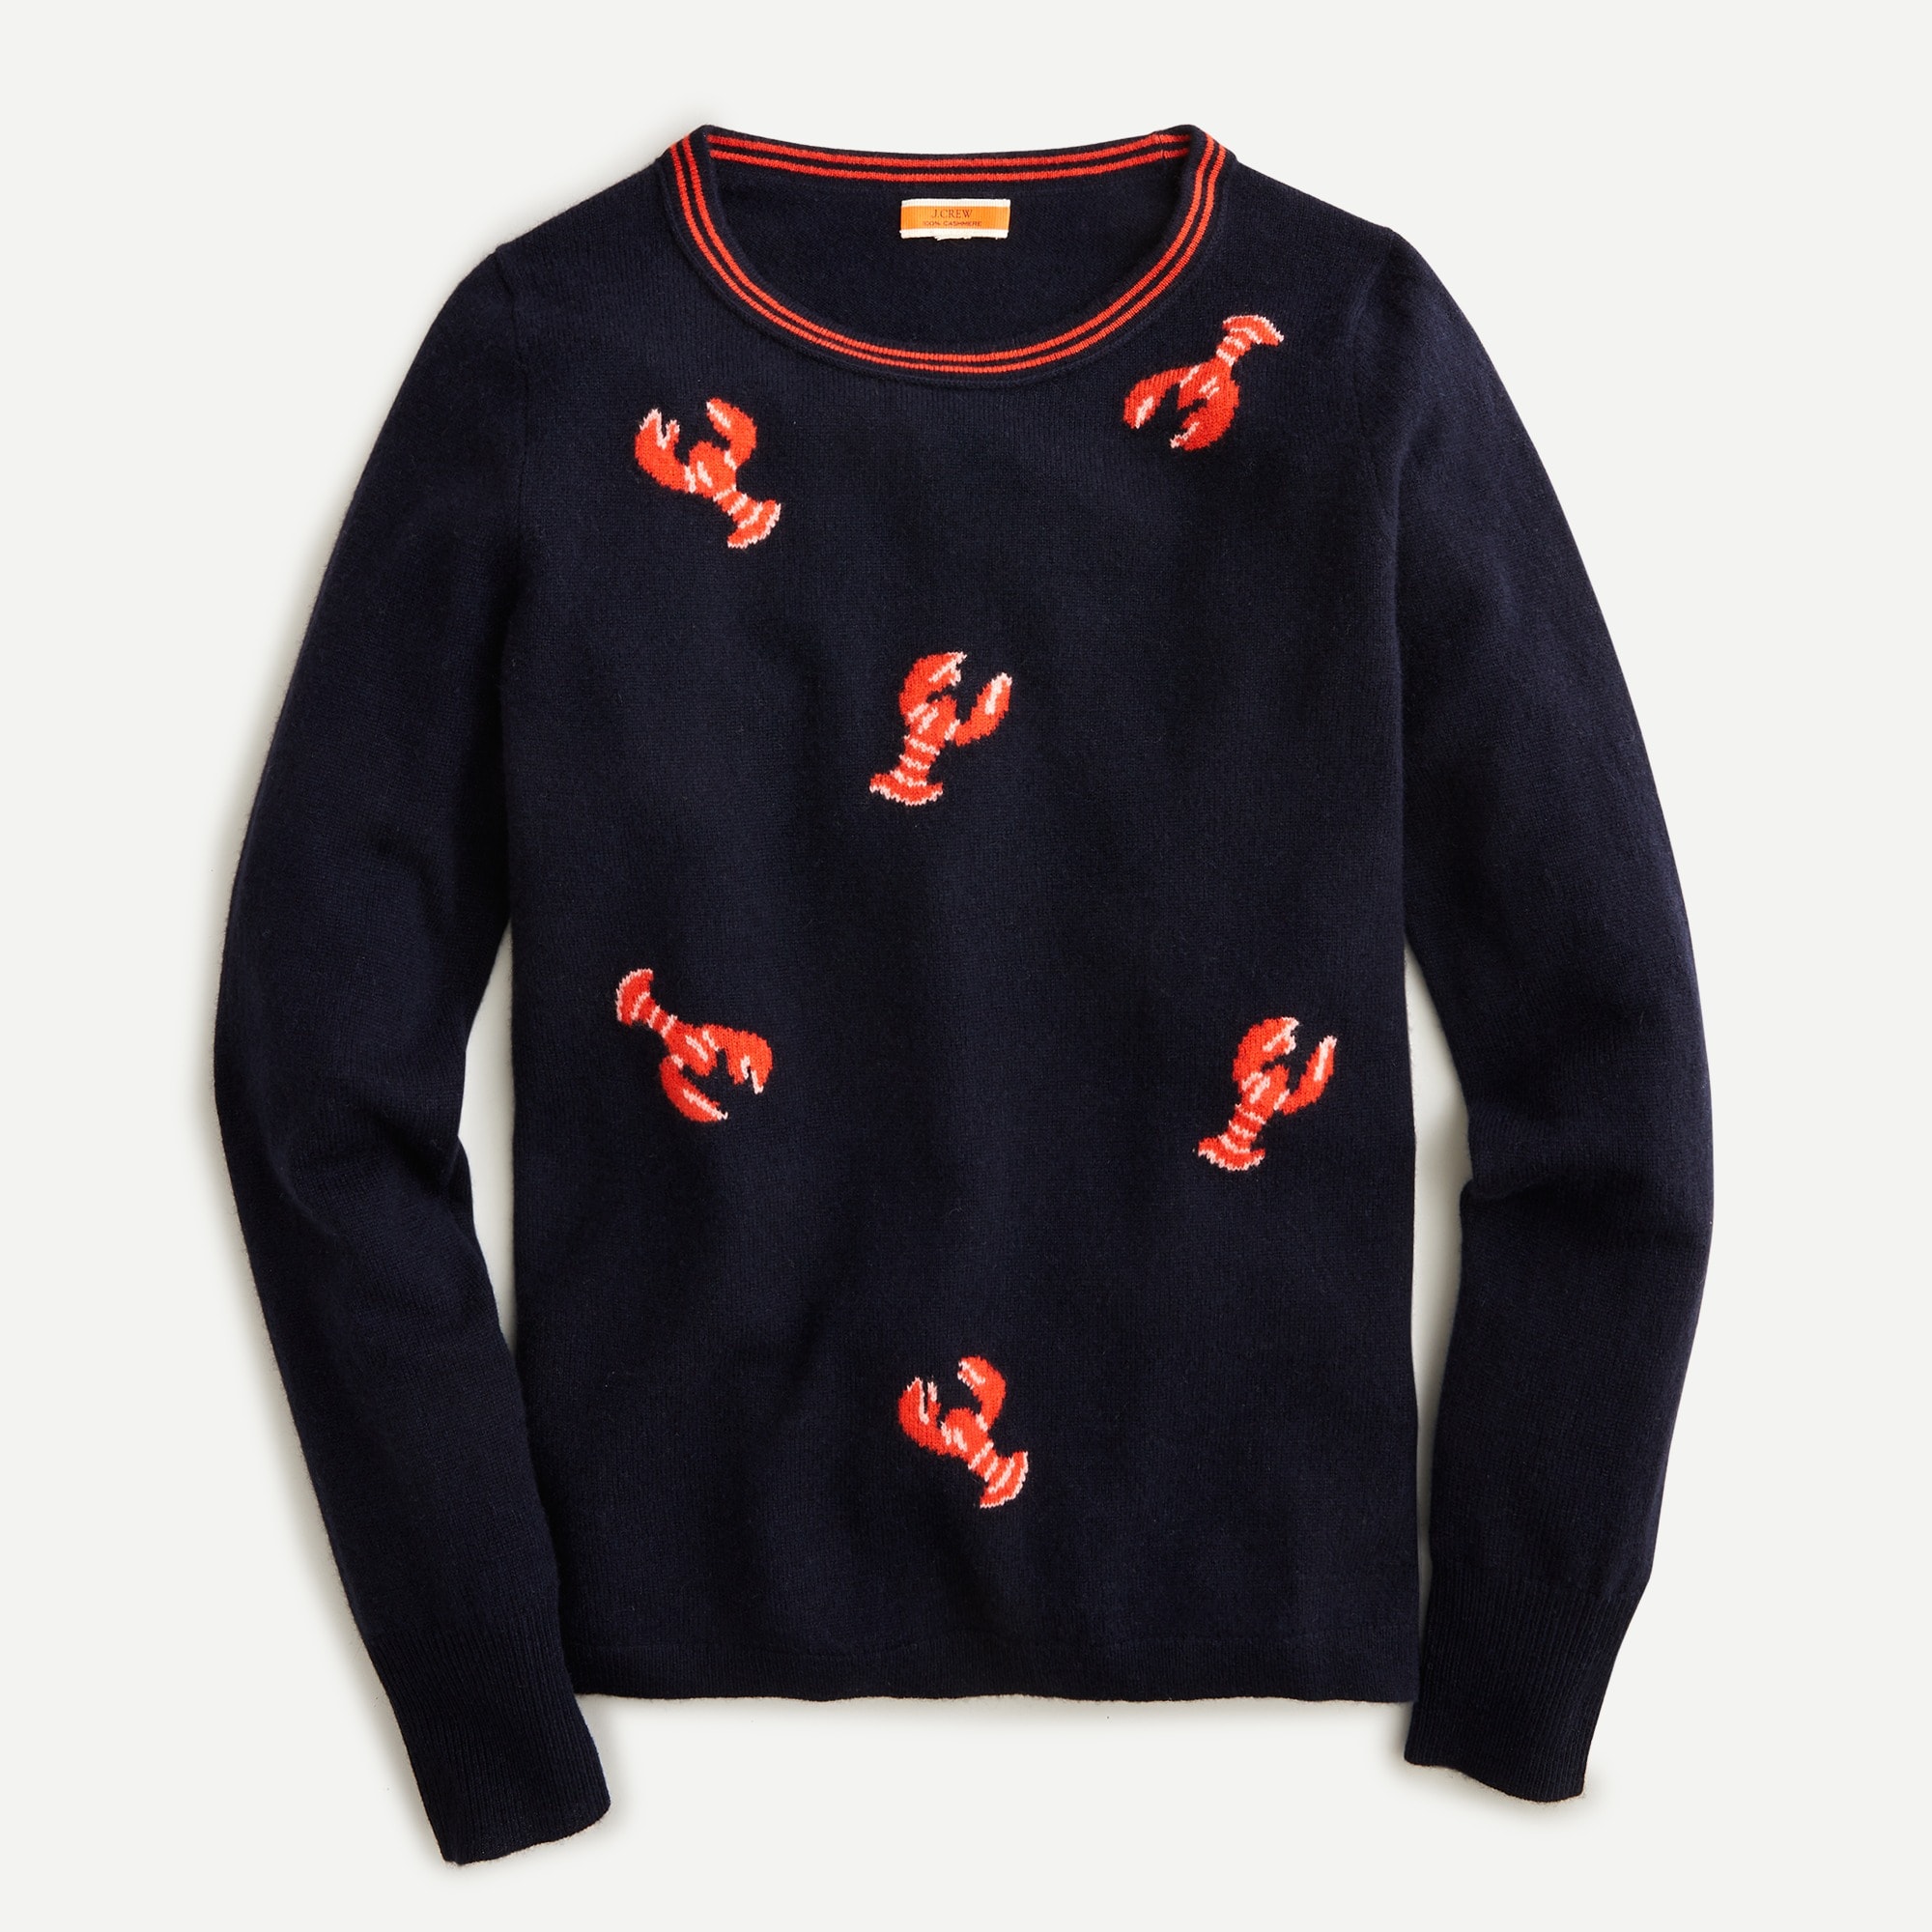 Cashmere crewneck sweater in flying lobsters print